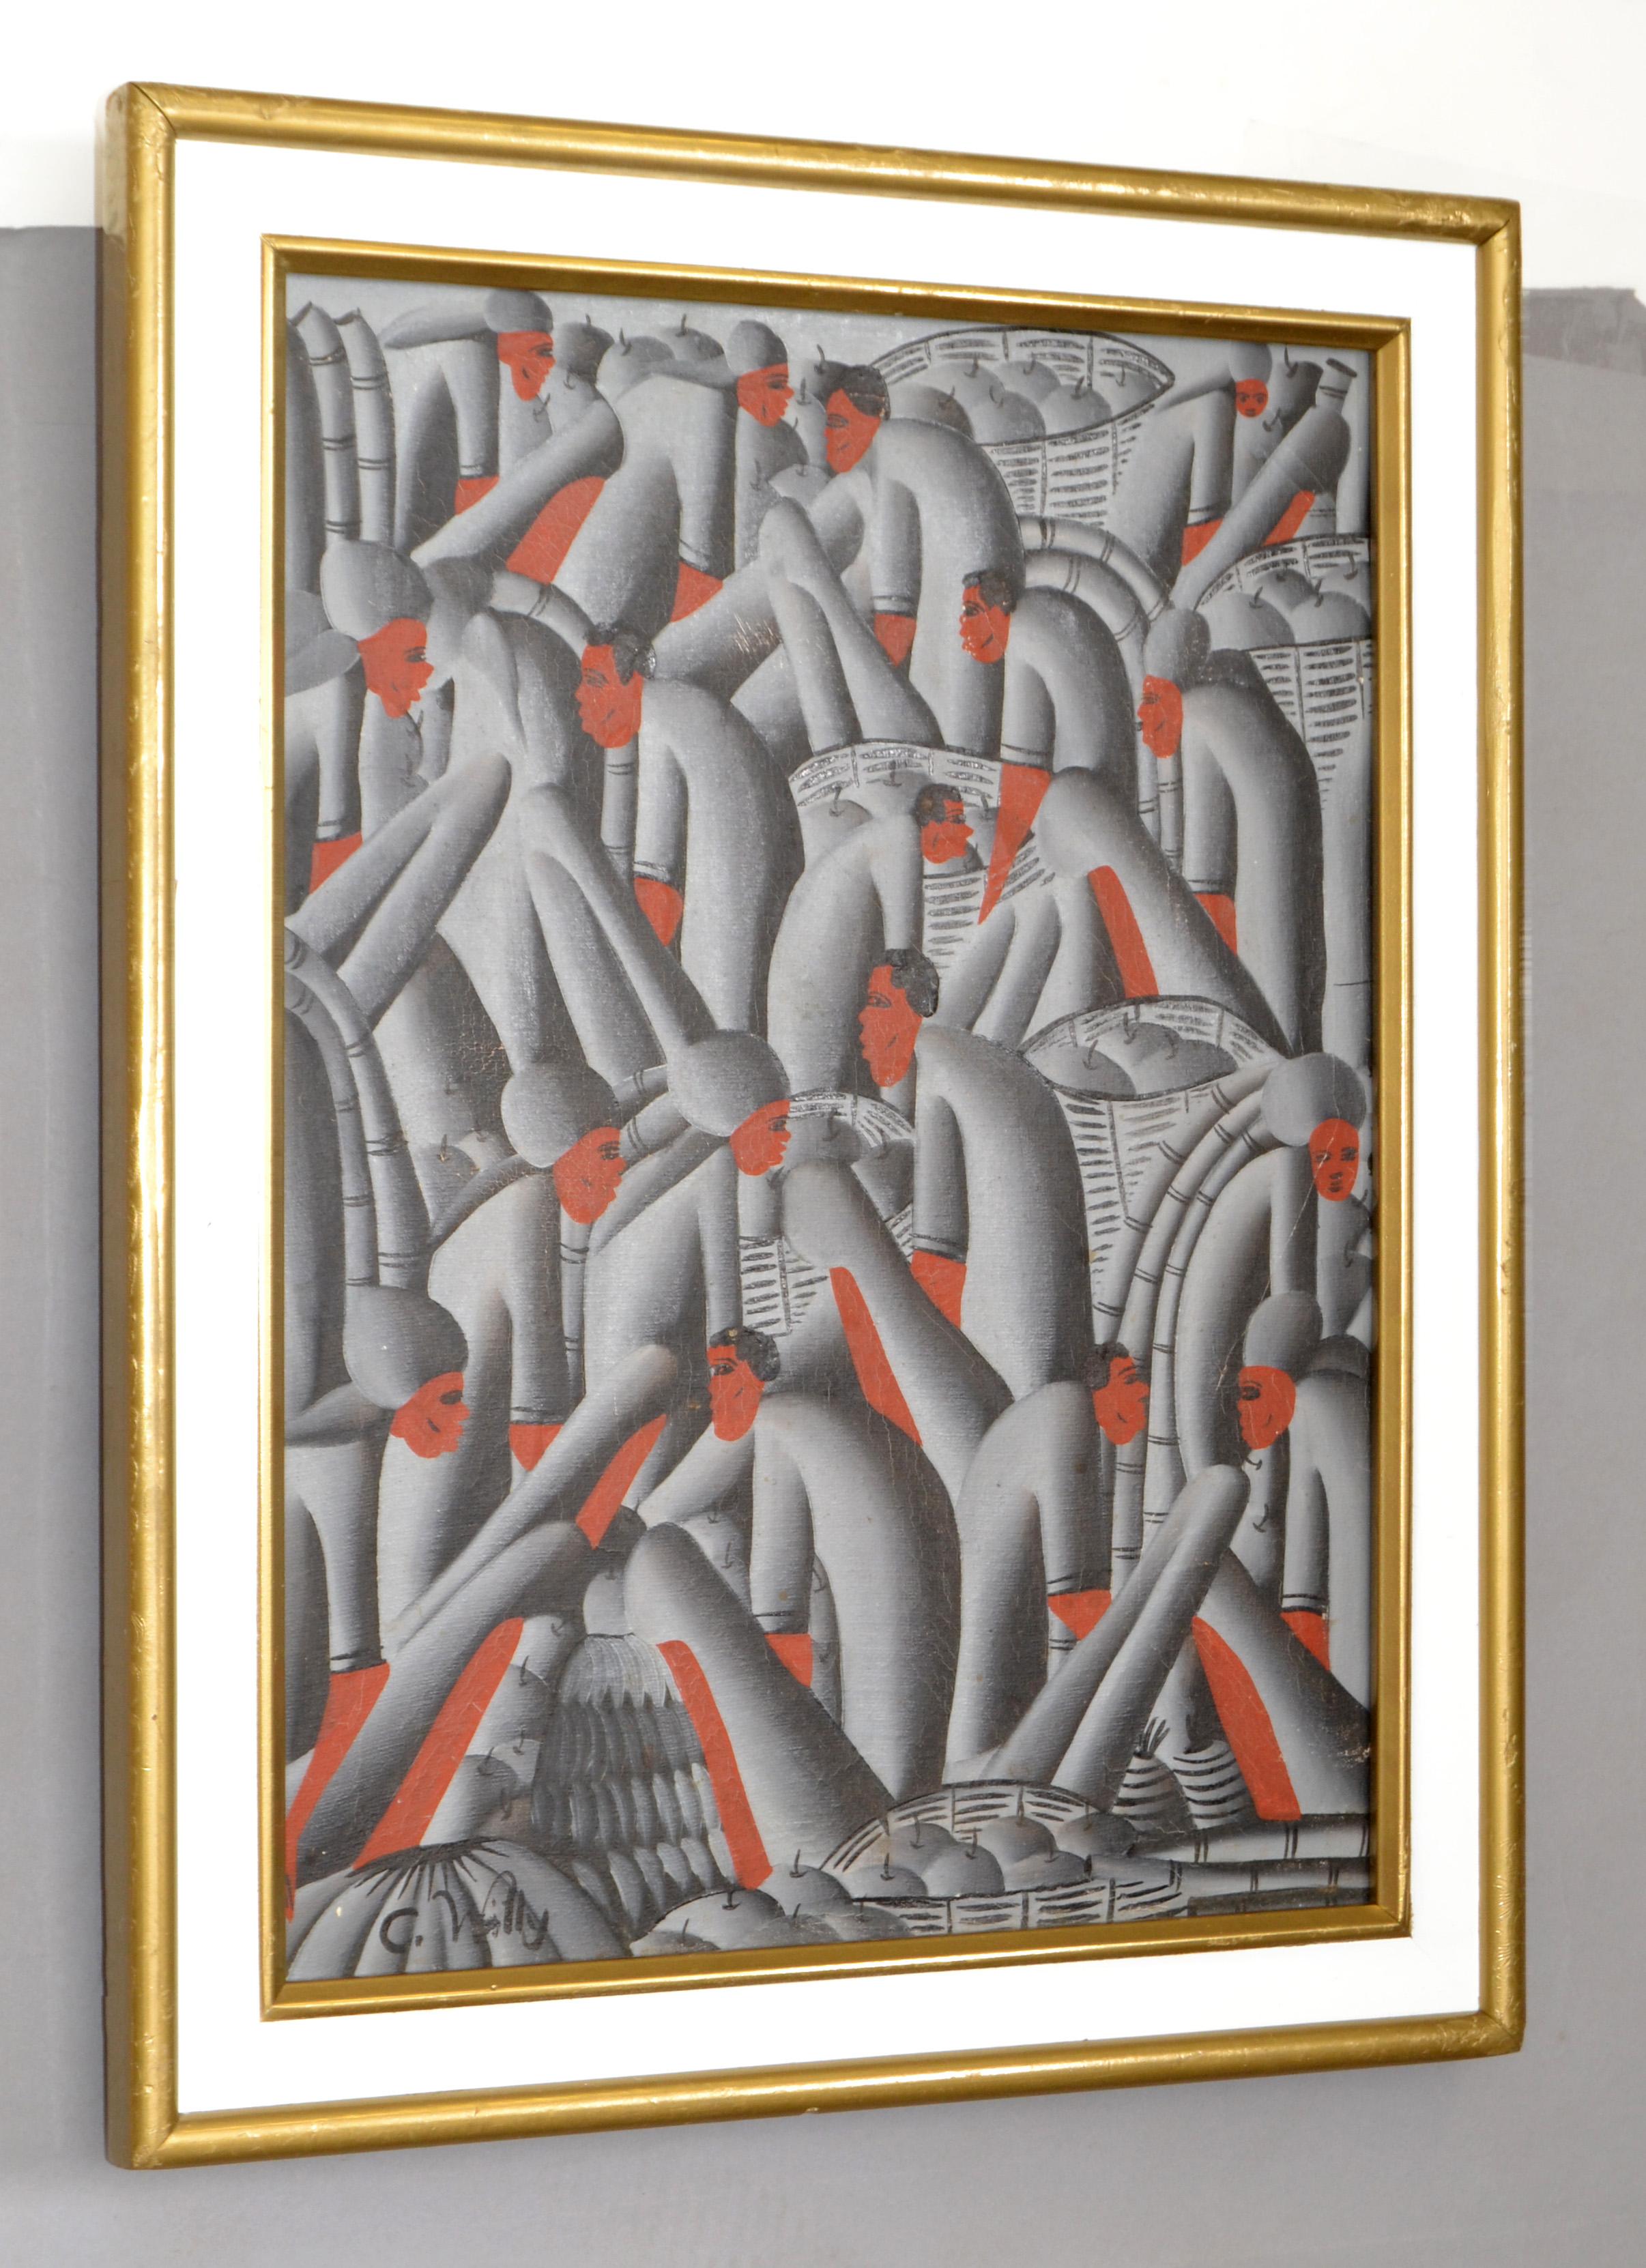 Signed C. Willy Cubism Pop Art Style showing people in gray and black harvesting apples and bananas.
Made in the late 1970s and signed by the Artist at the left bottom corner.
It is framed in giltwood and in original condition with some scratches